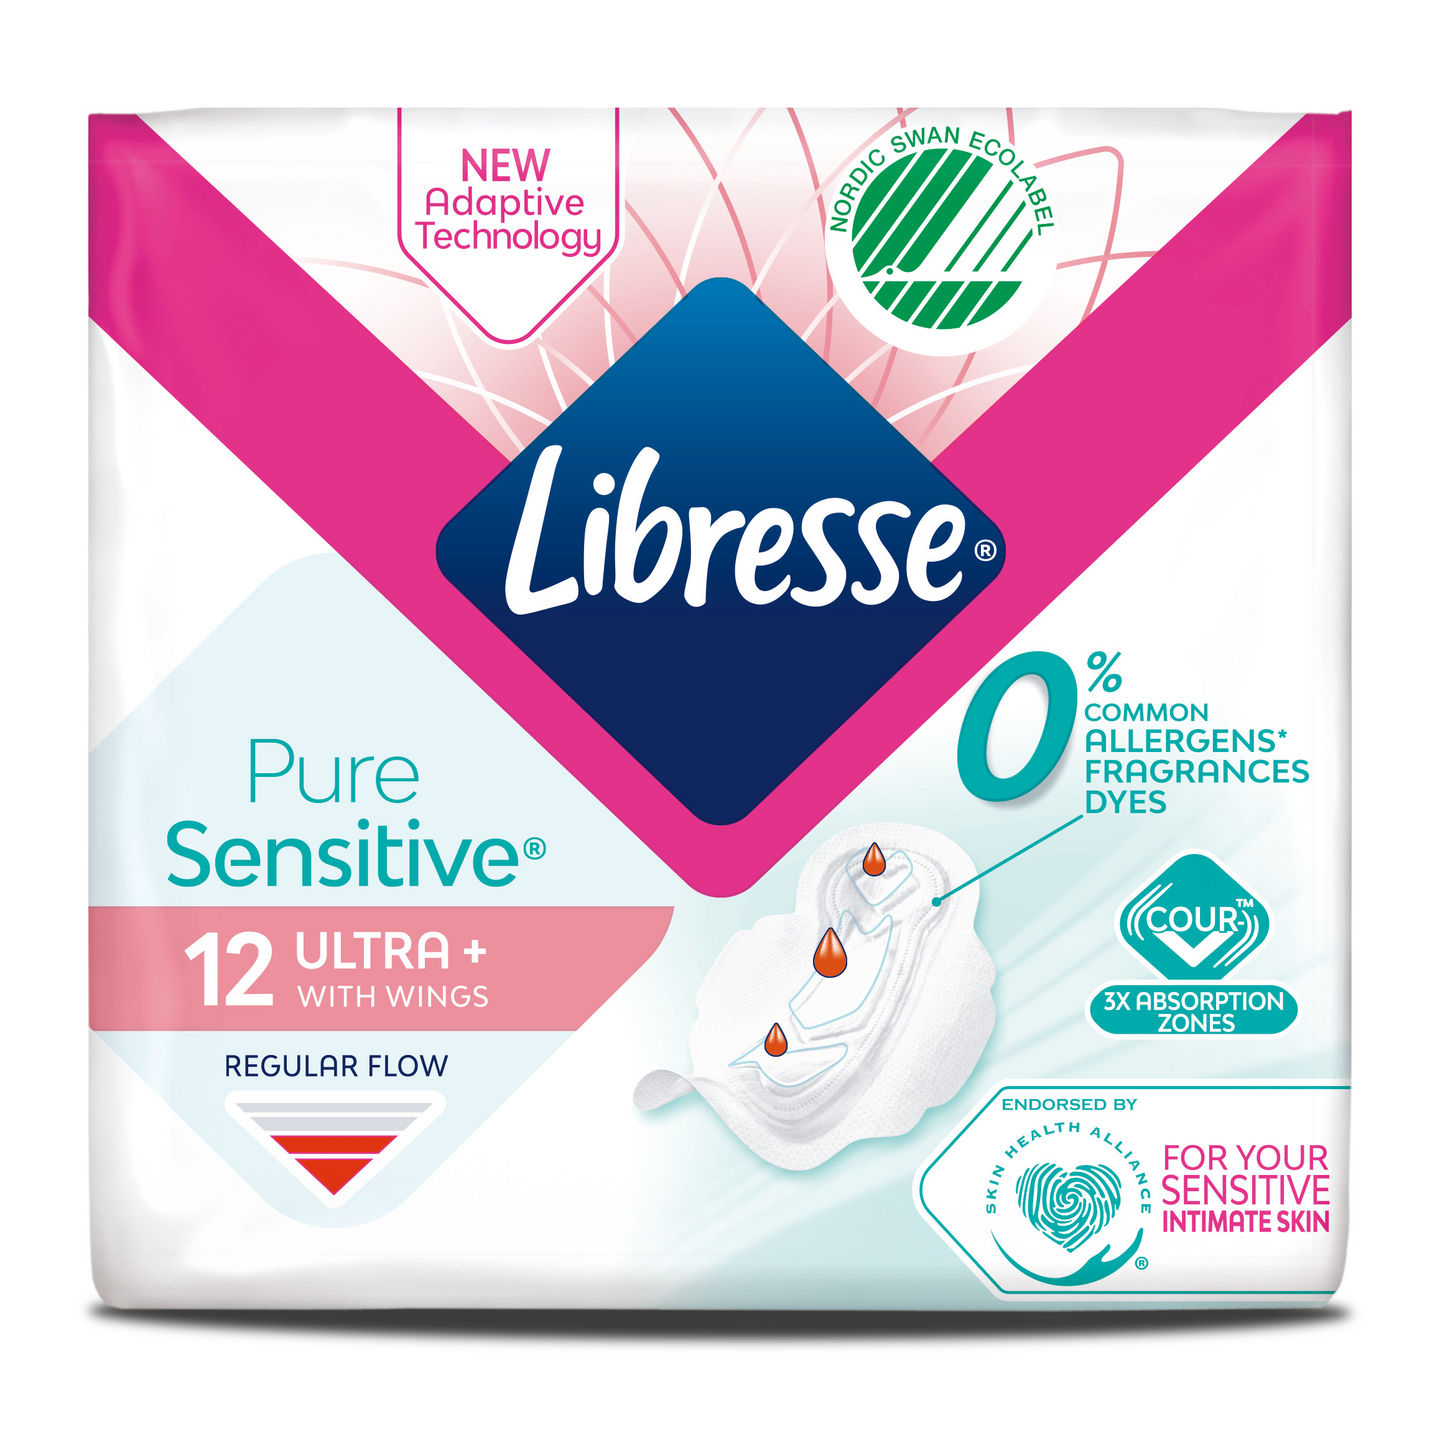 Libresse side 12kpl Ultra Norm Pure Sensitive with wings